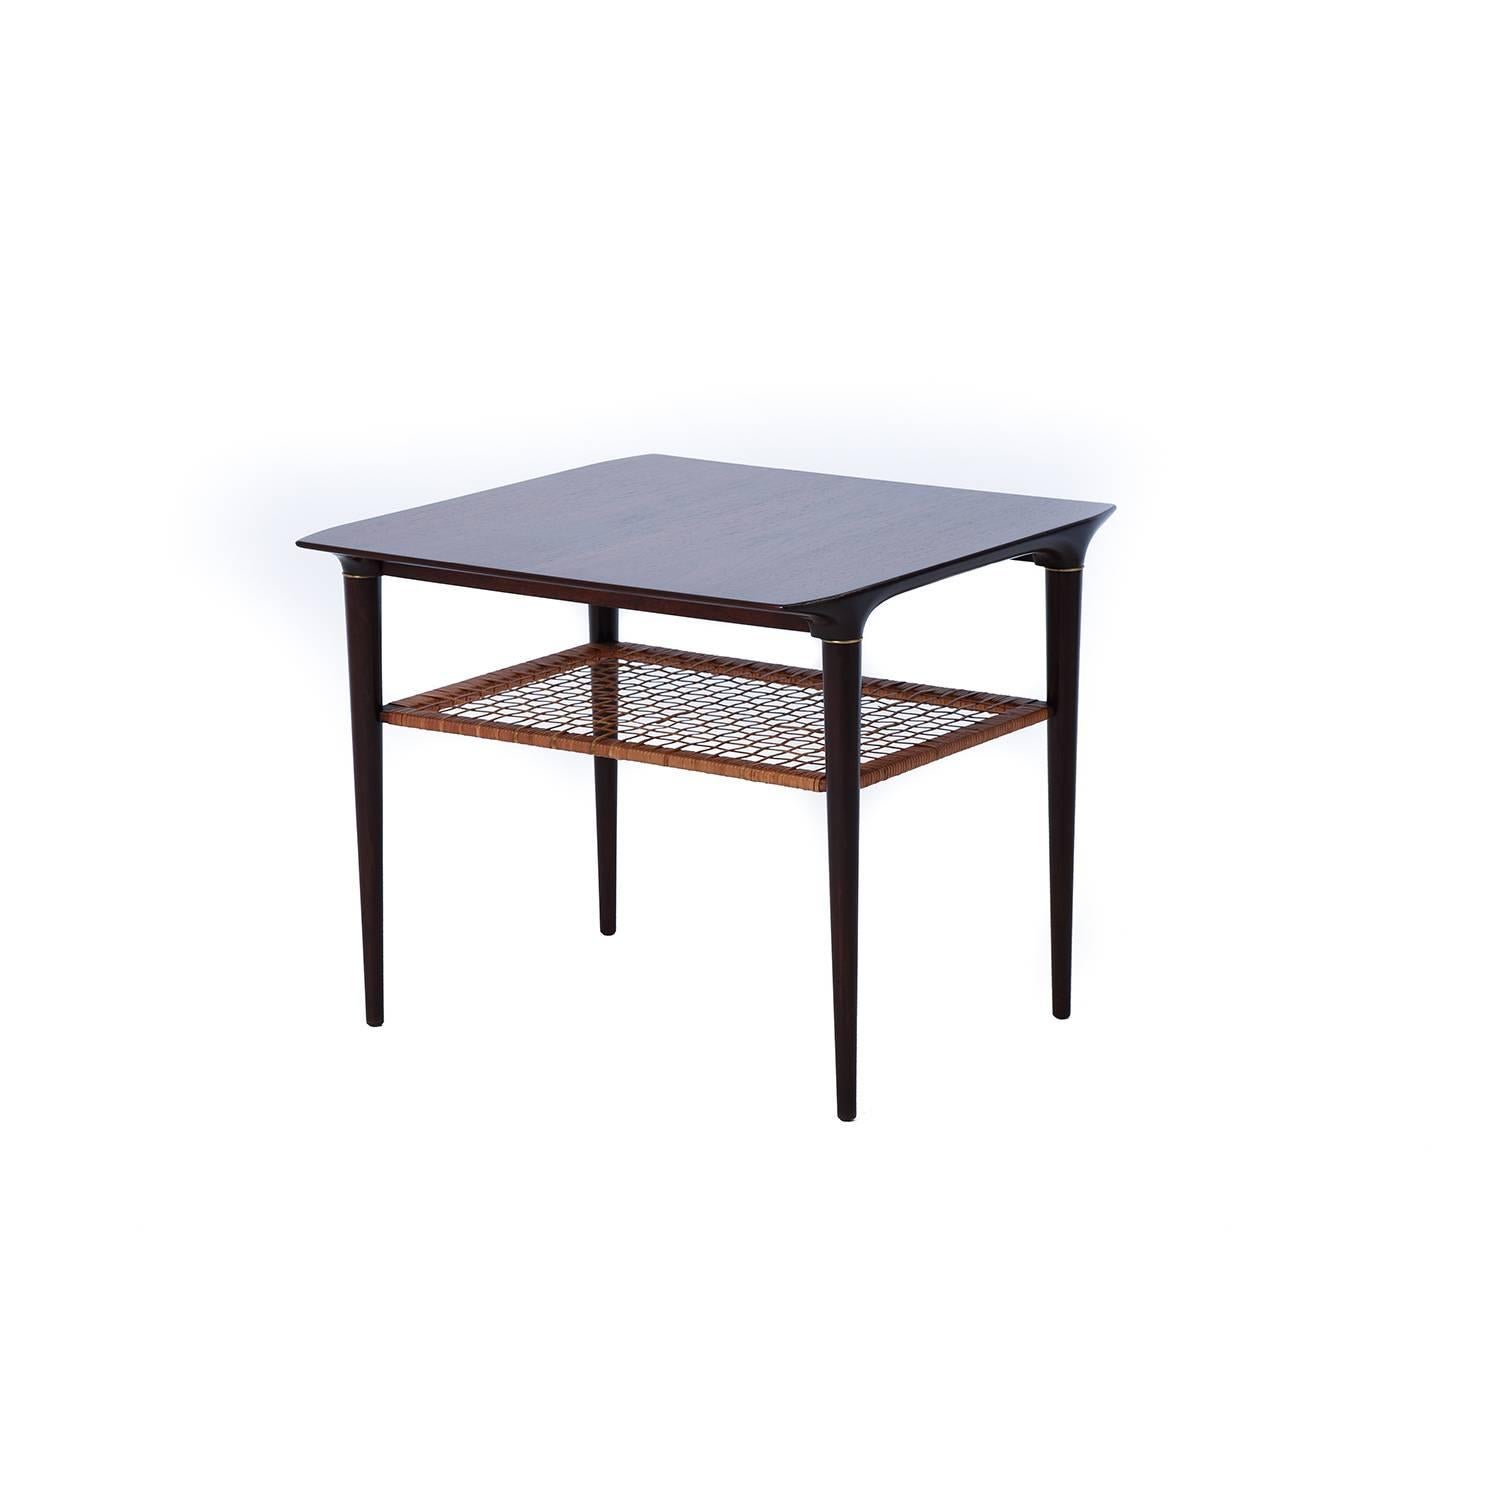 This elegant corner table is a Classical example of Danish modern rosewood, with a deeply figured grain pattern on the surface. Cane shelf and brass ring details. Lacquer finished.